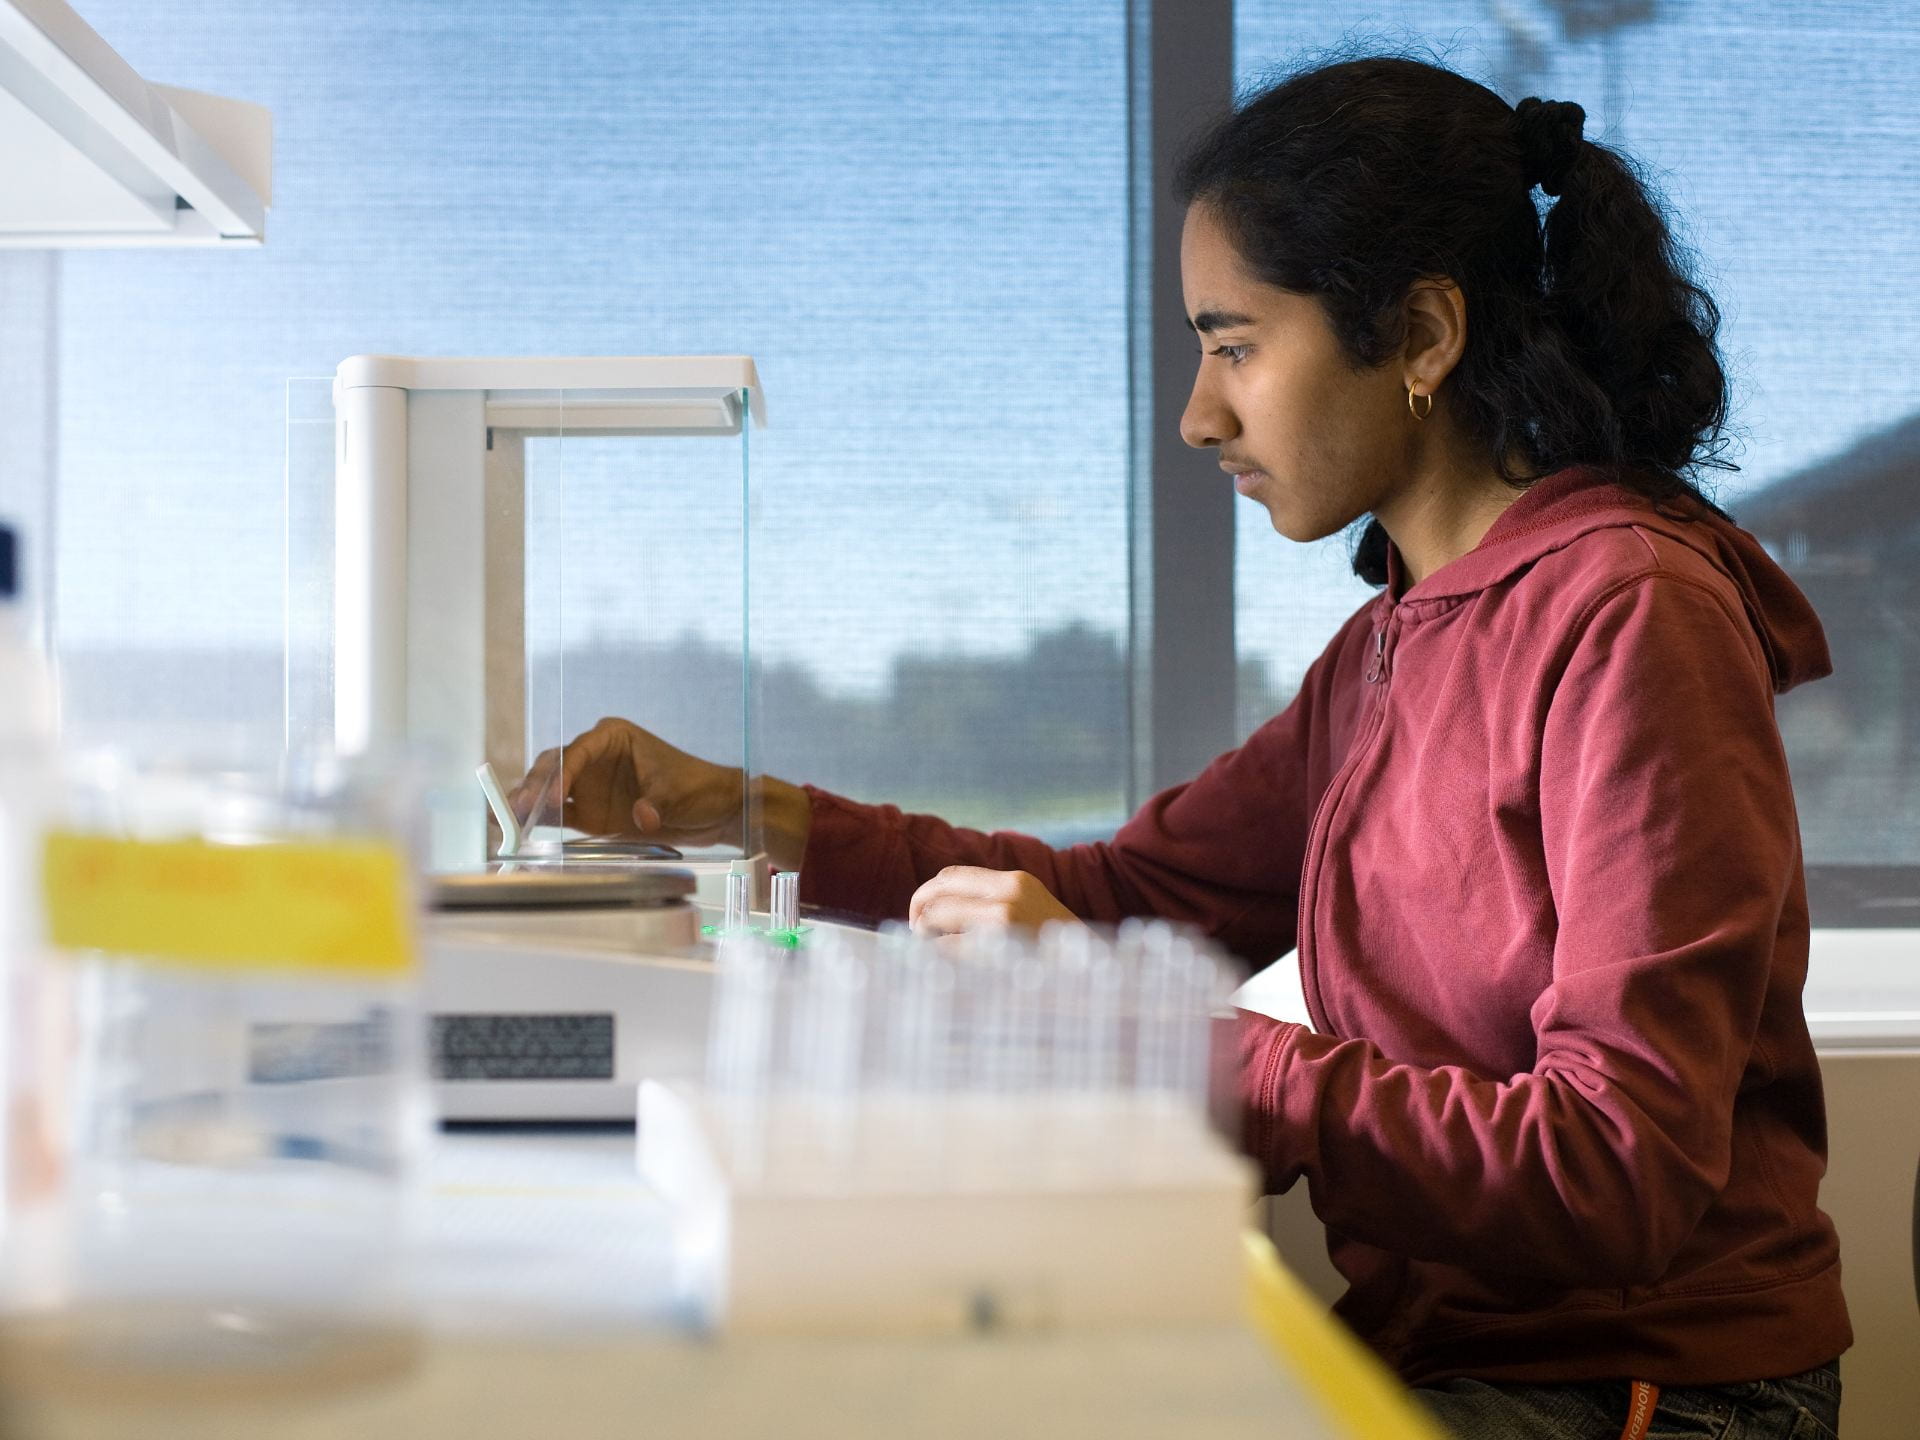 A photograph of a biomedical engineering student working in a lab